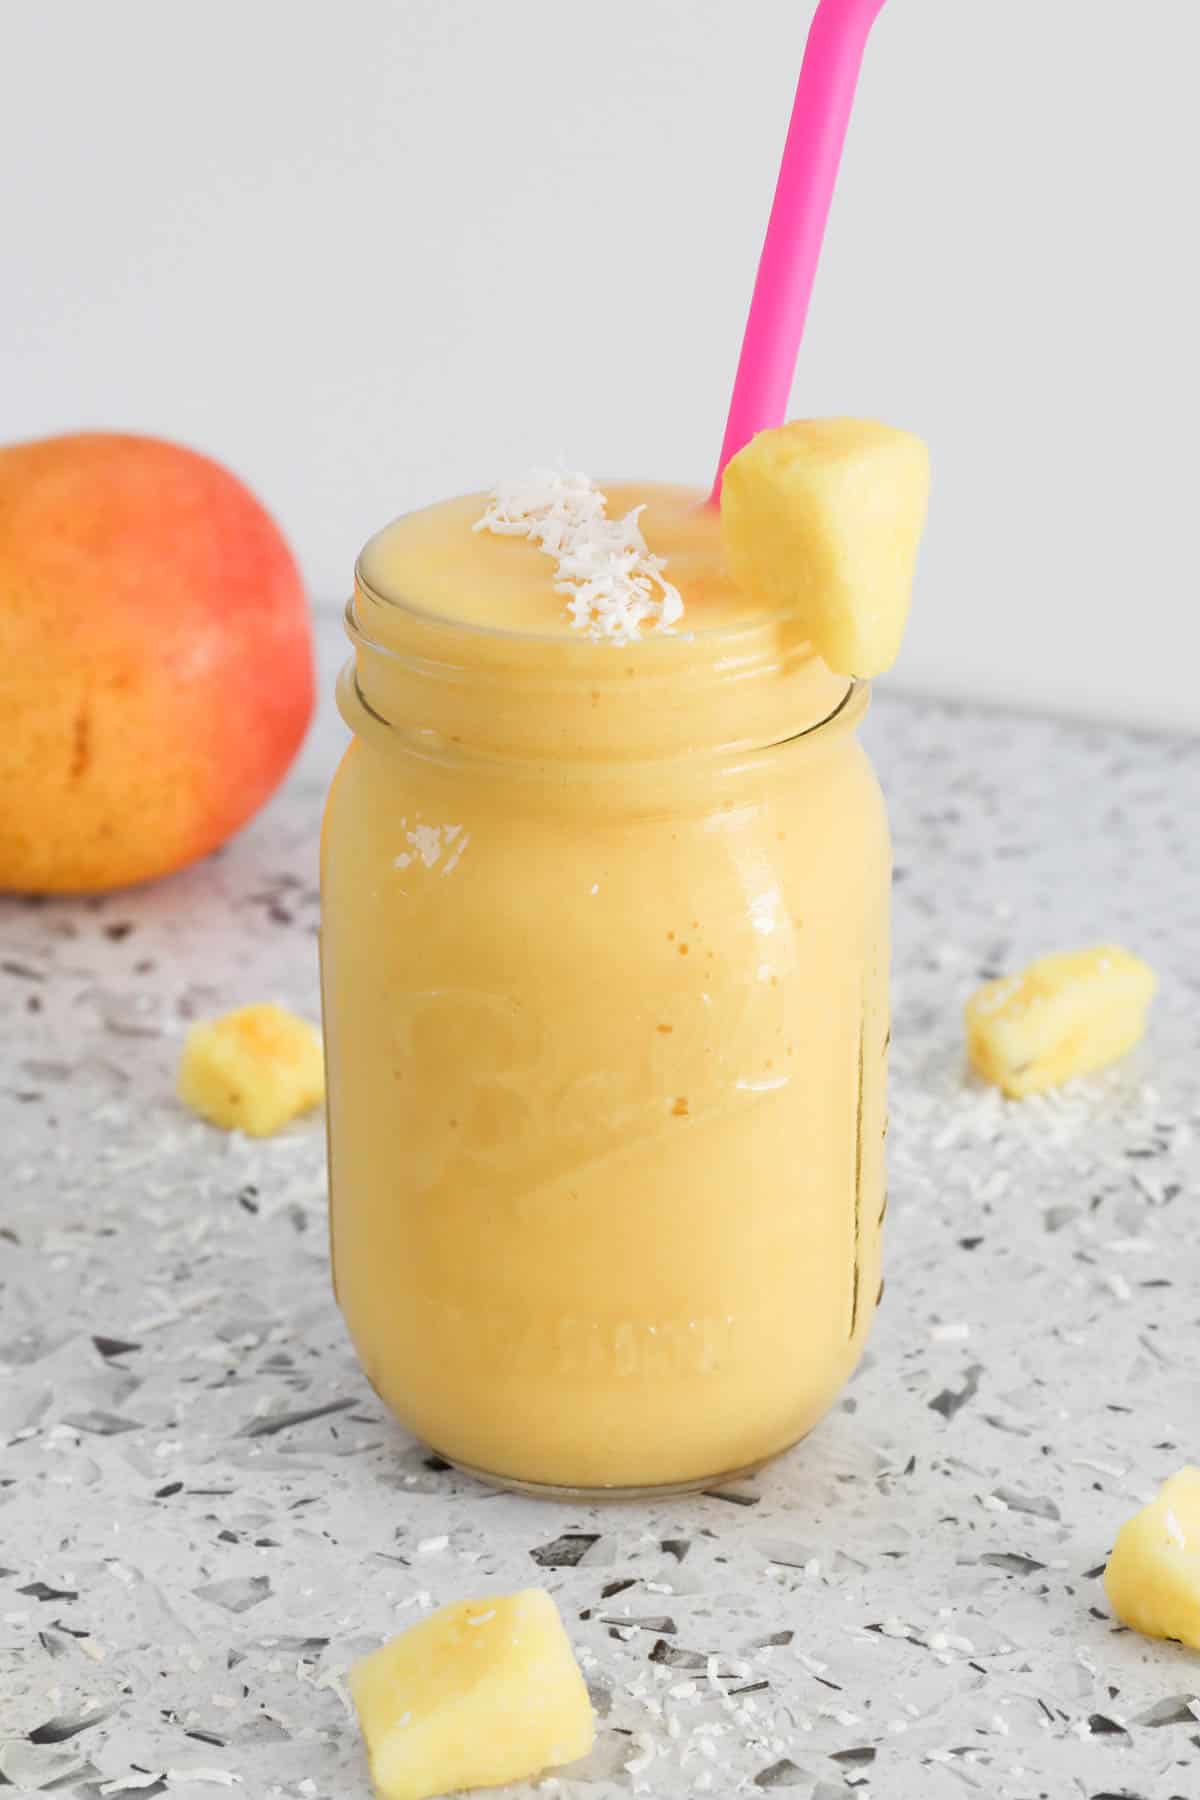 Mango pineapple smoothie in a glass jar with a pink straw.